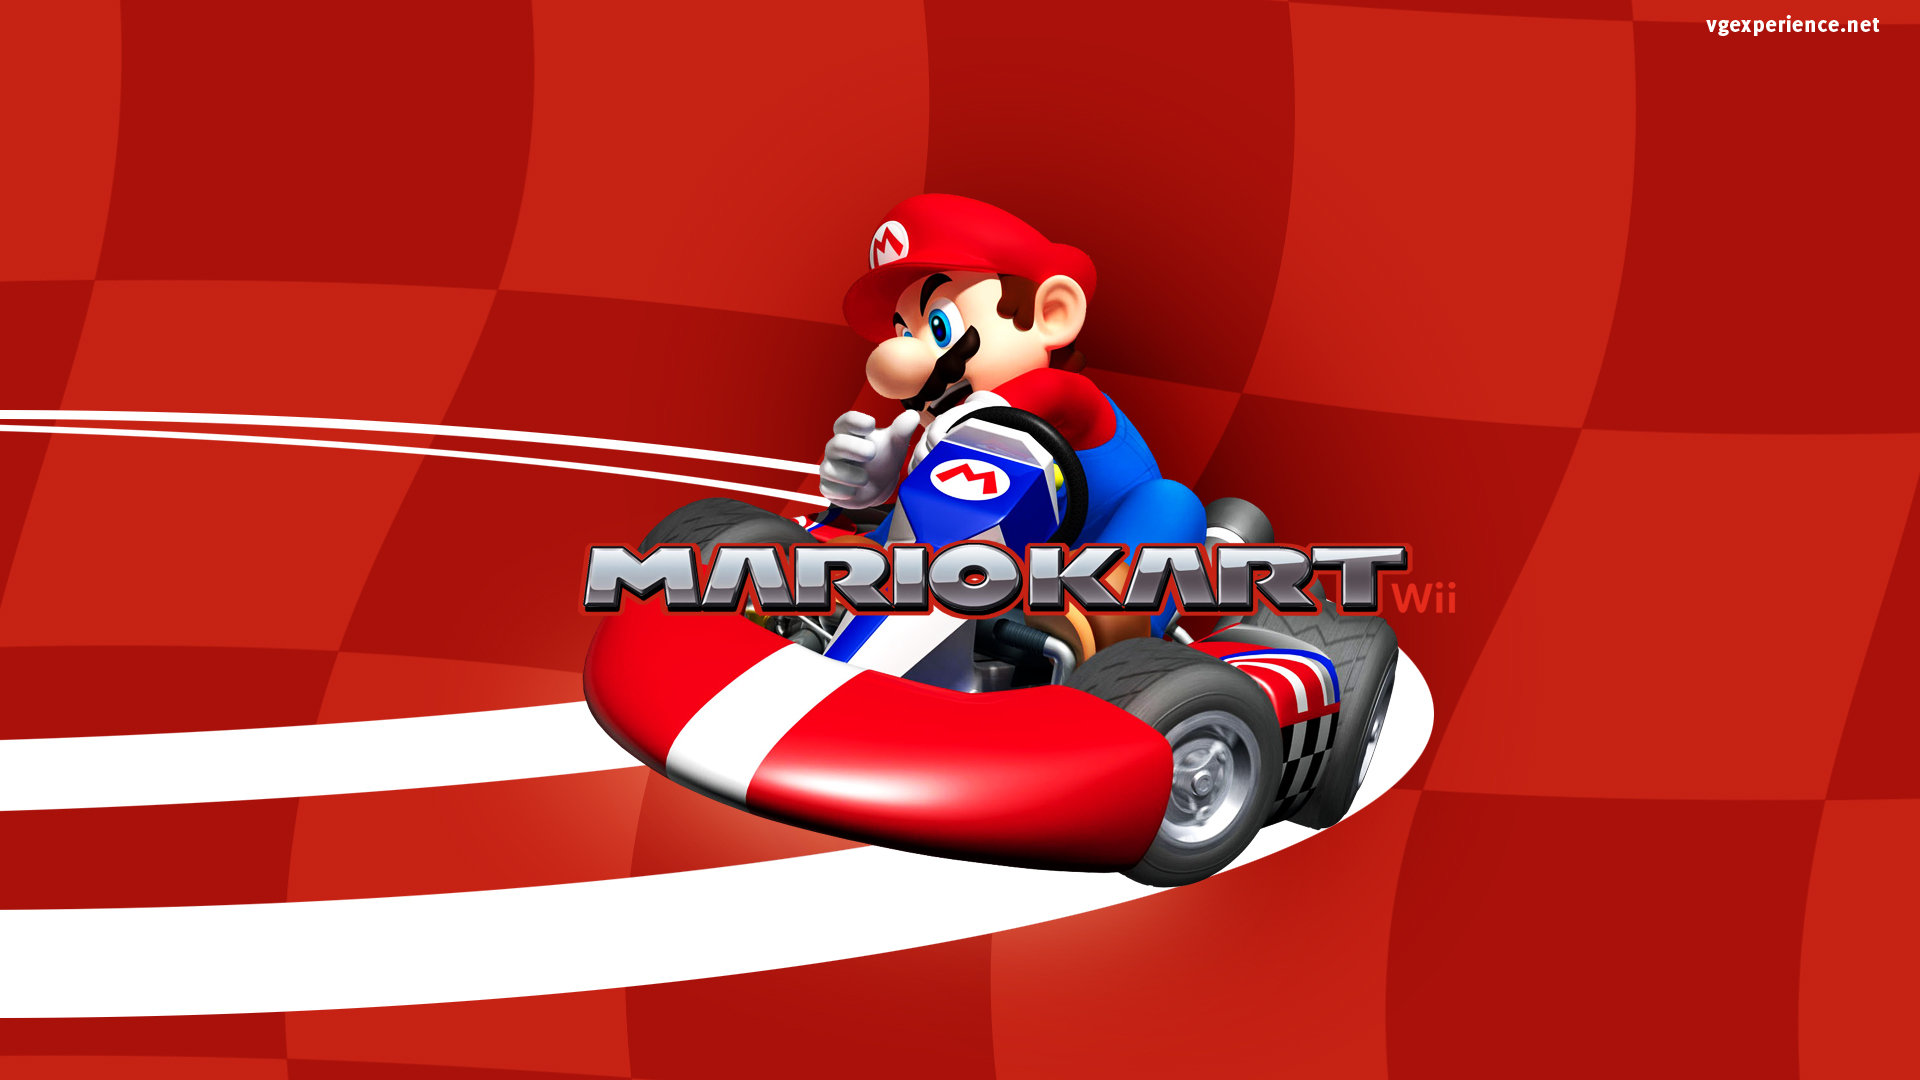 Awesome Mario Kart Wii free background ID:324443 for full hd 1080p desktop